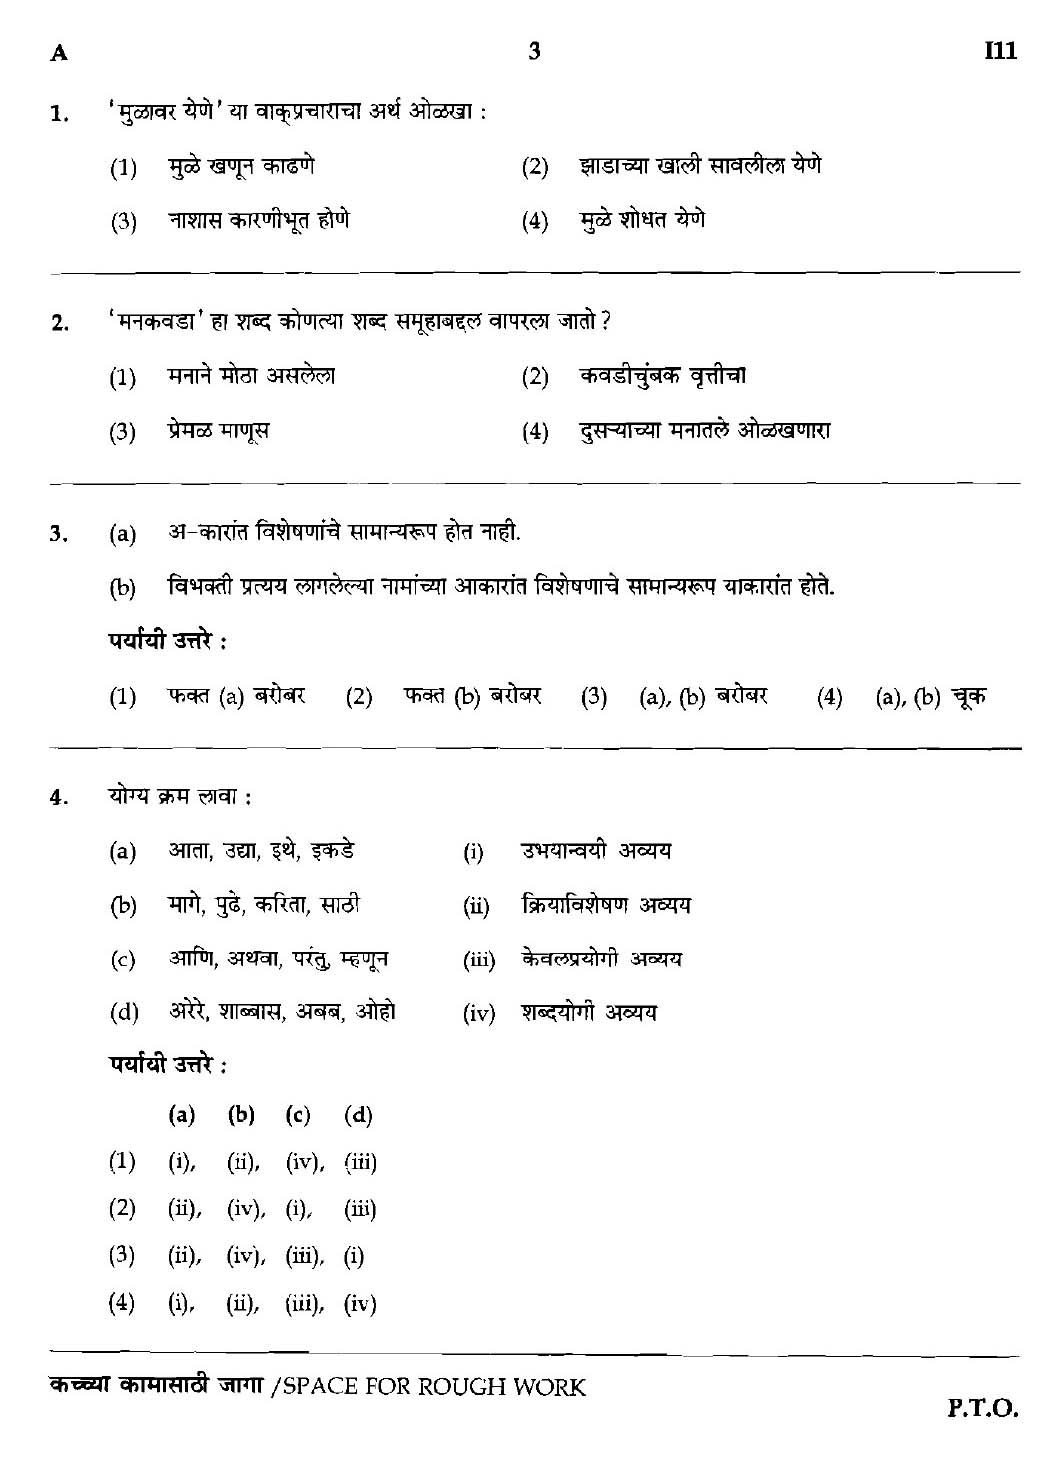 MPSC Agricultural Services Preliminary Exam 2018 Question Paper 2